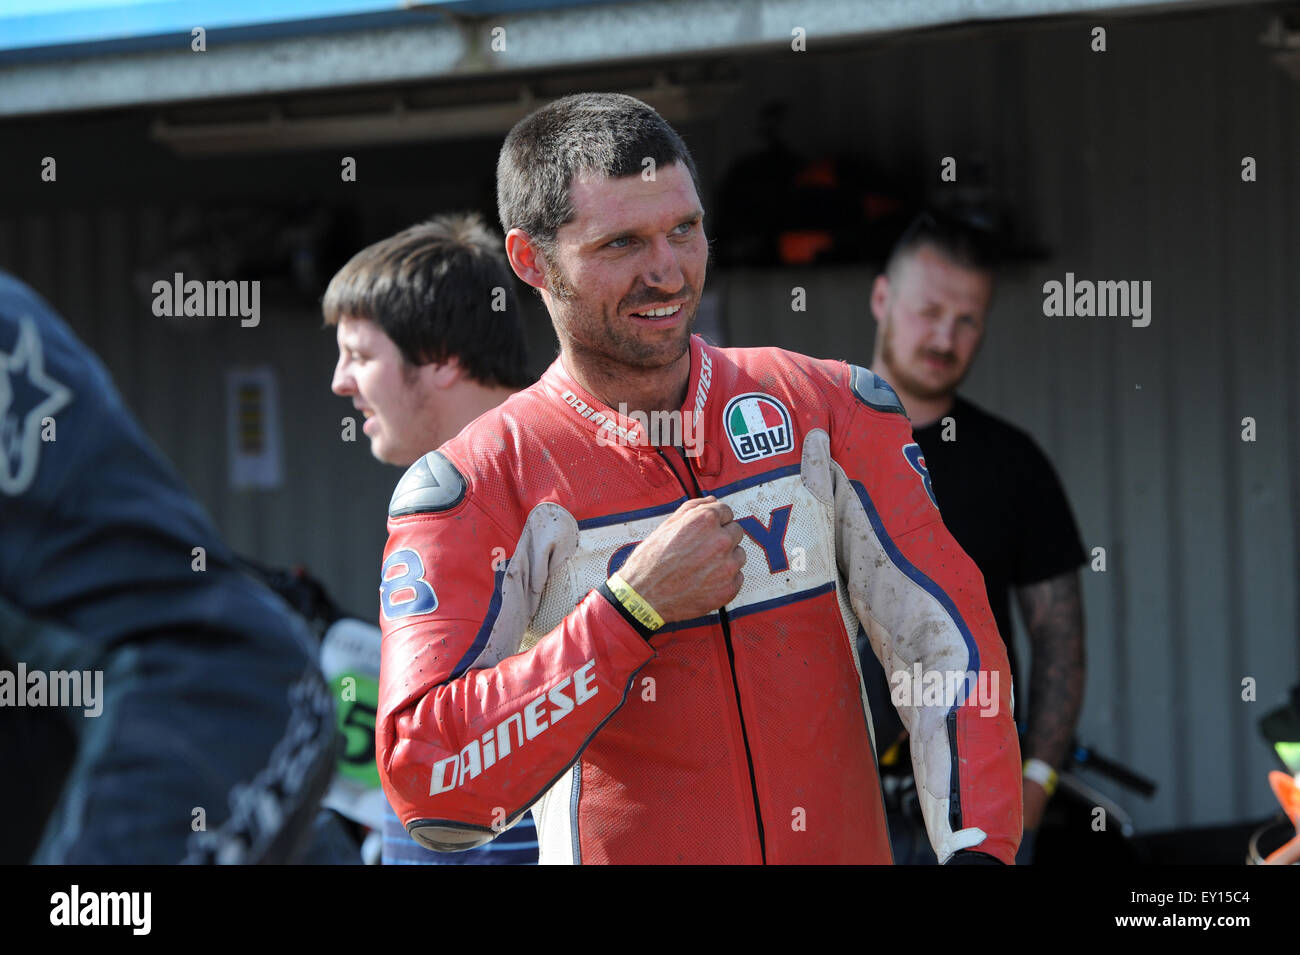 Kings Lynn, Norfolk, UK. 18/07/2015. Dirt Quake IV. Racing on a dirt track Guy Martin in red leathers in the pit. ©Becky Matthews Stock Photo